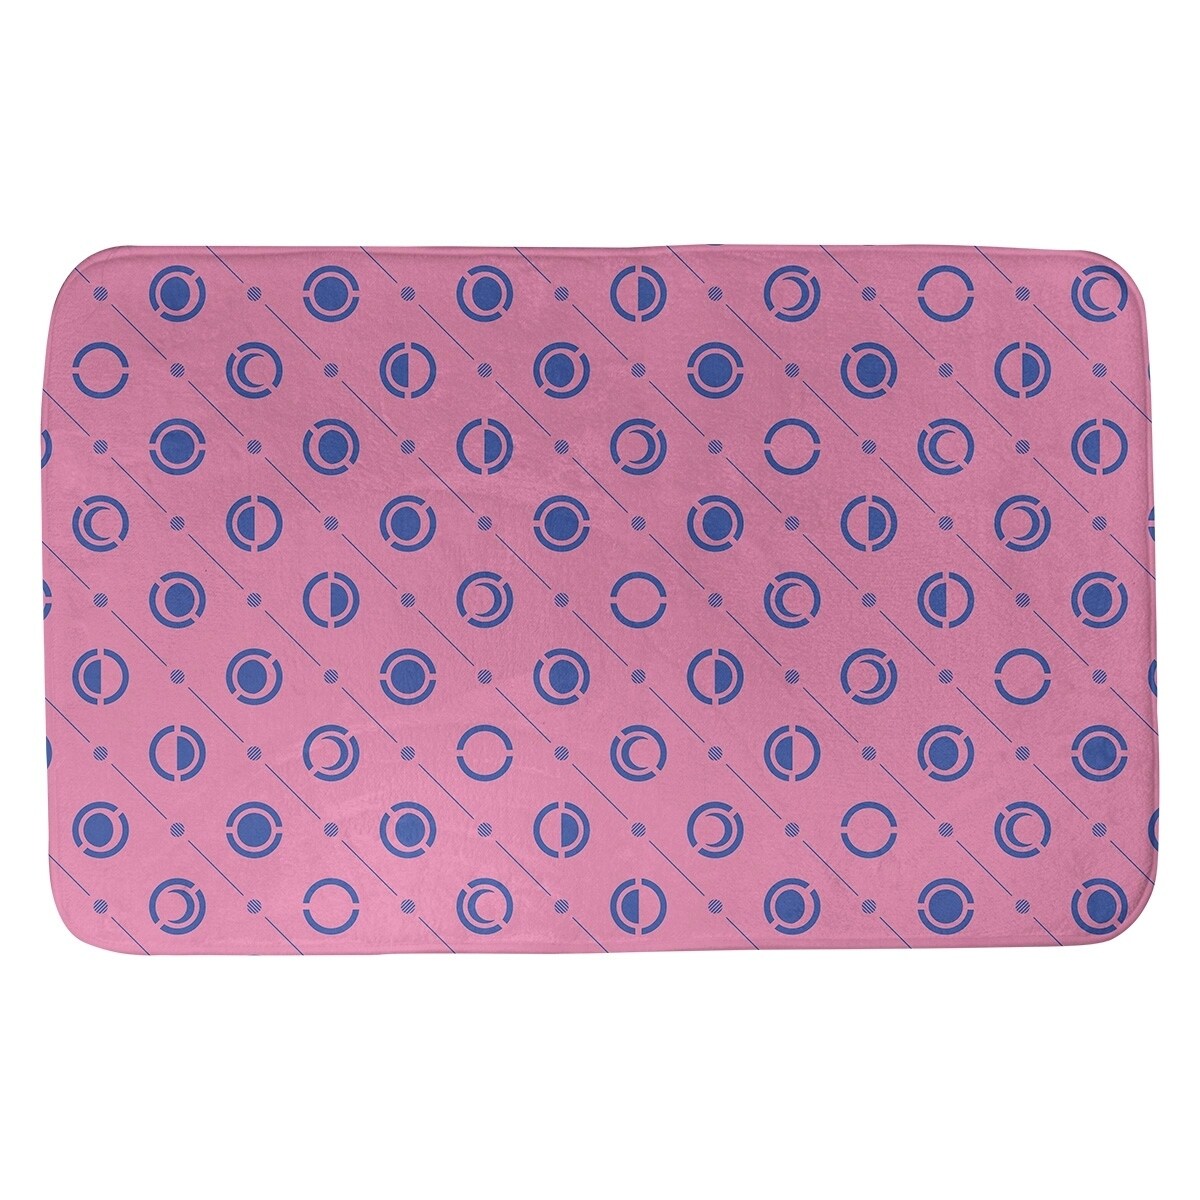 Two Color Moon Phases Bath Mat